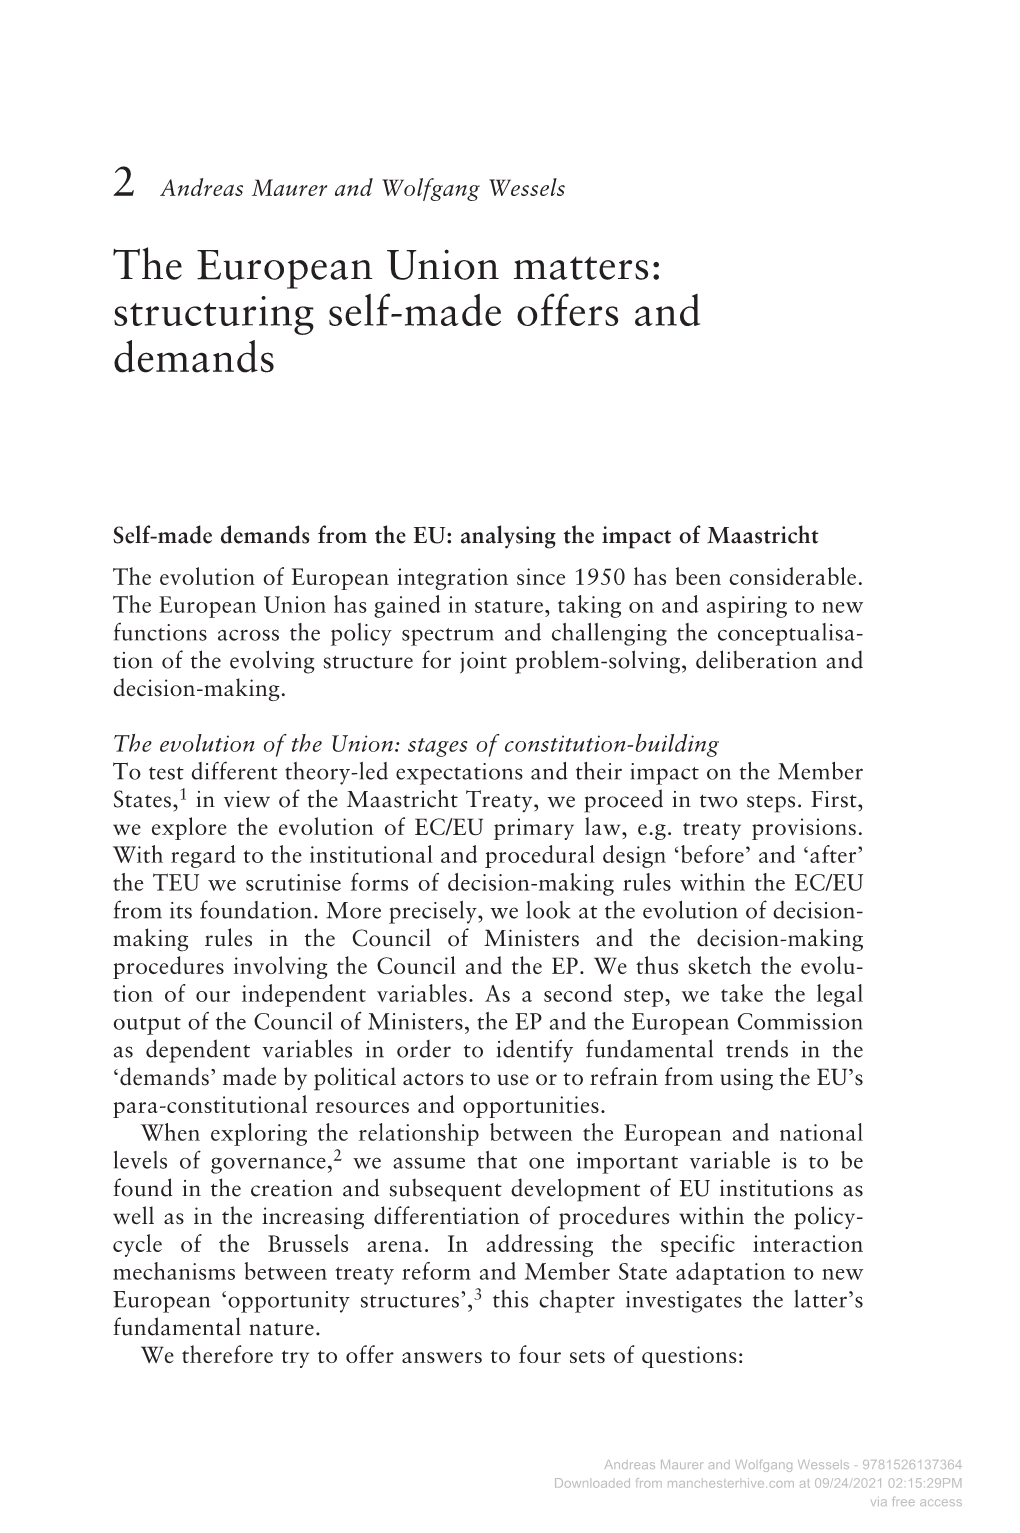 The European Union Matters: Structuring Self-Made Offers and Demands